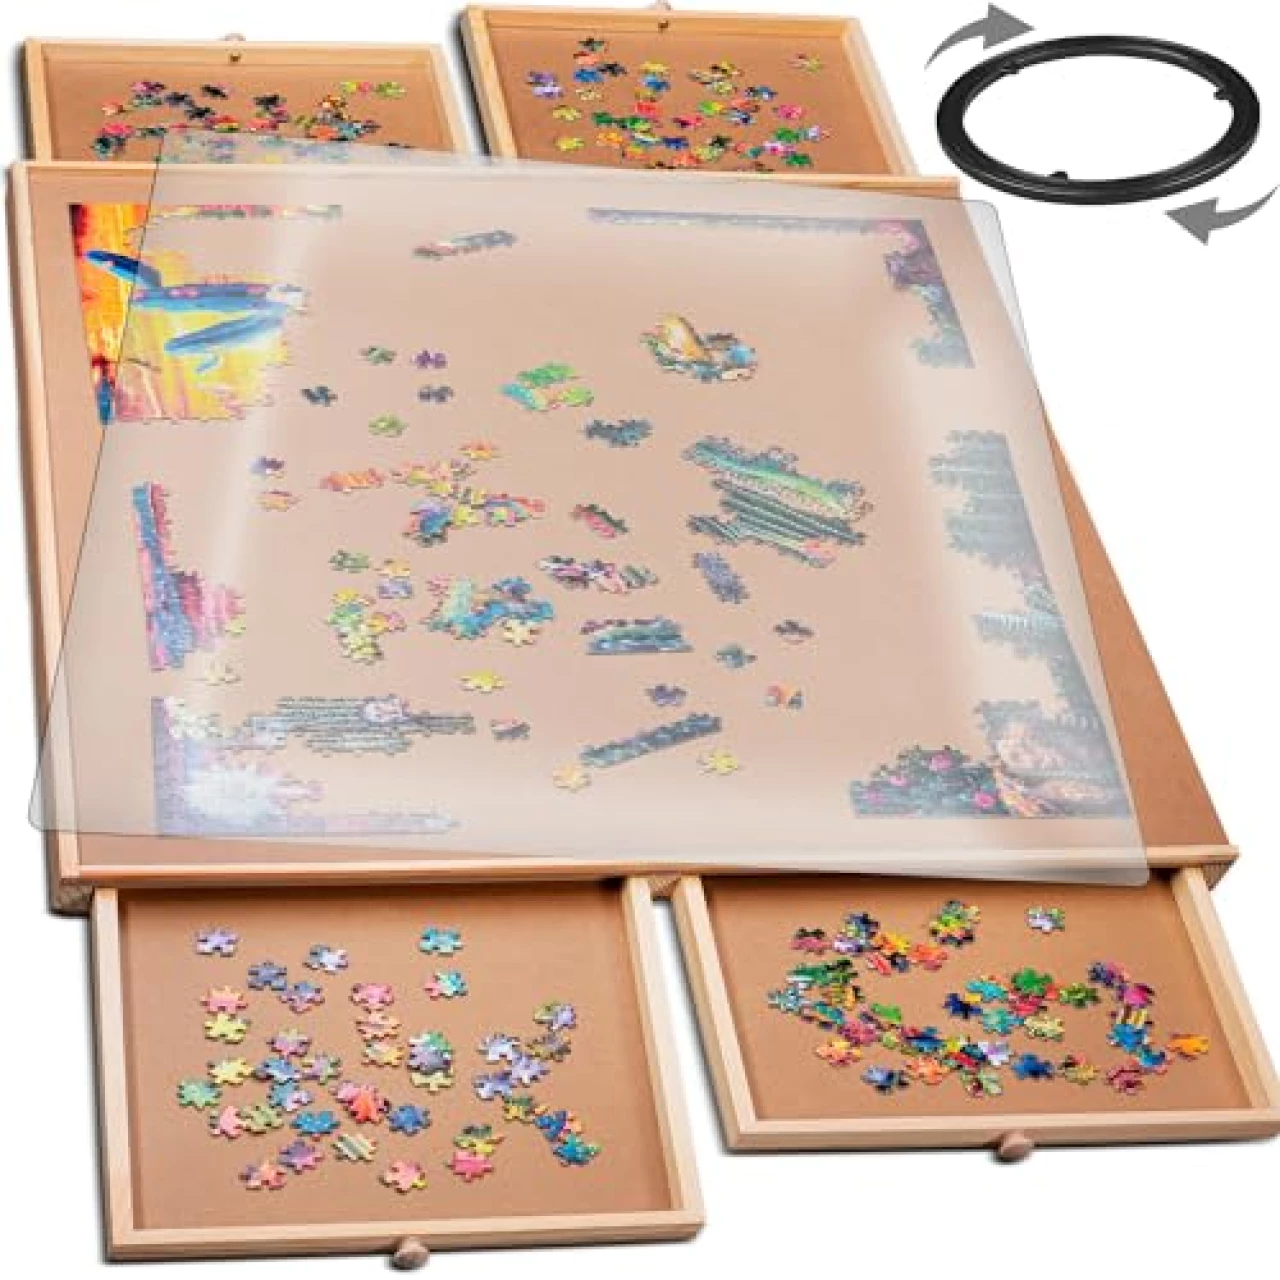 1000 Piece Rotating Wooden Jigsaw Puzzle Table - 4 Drawers